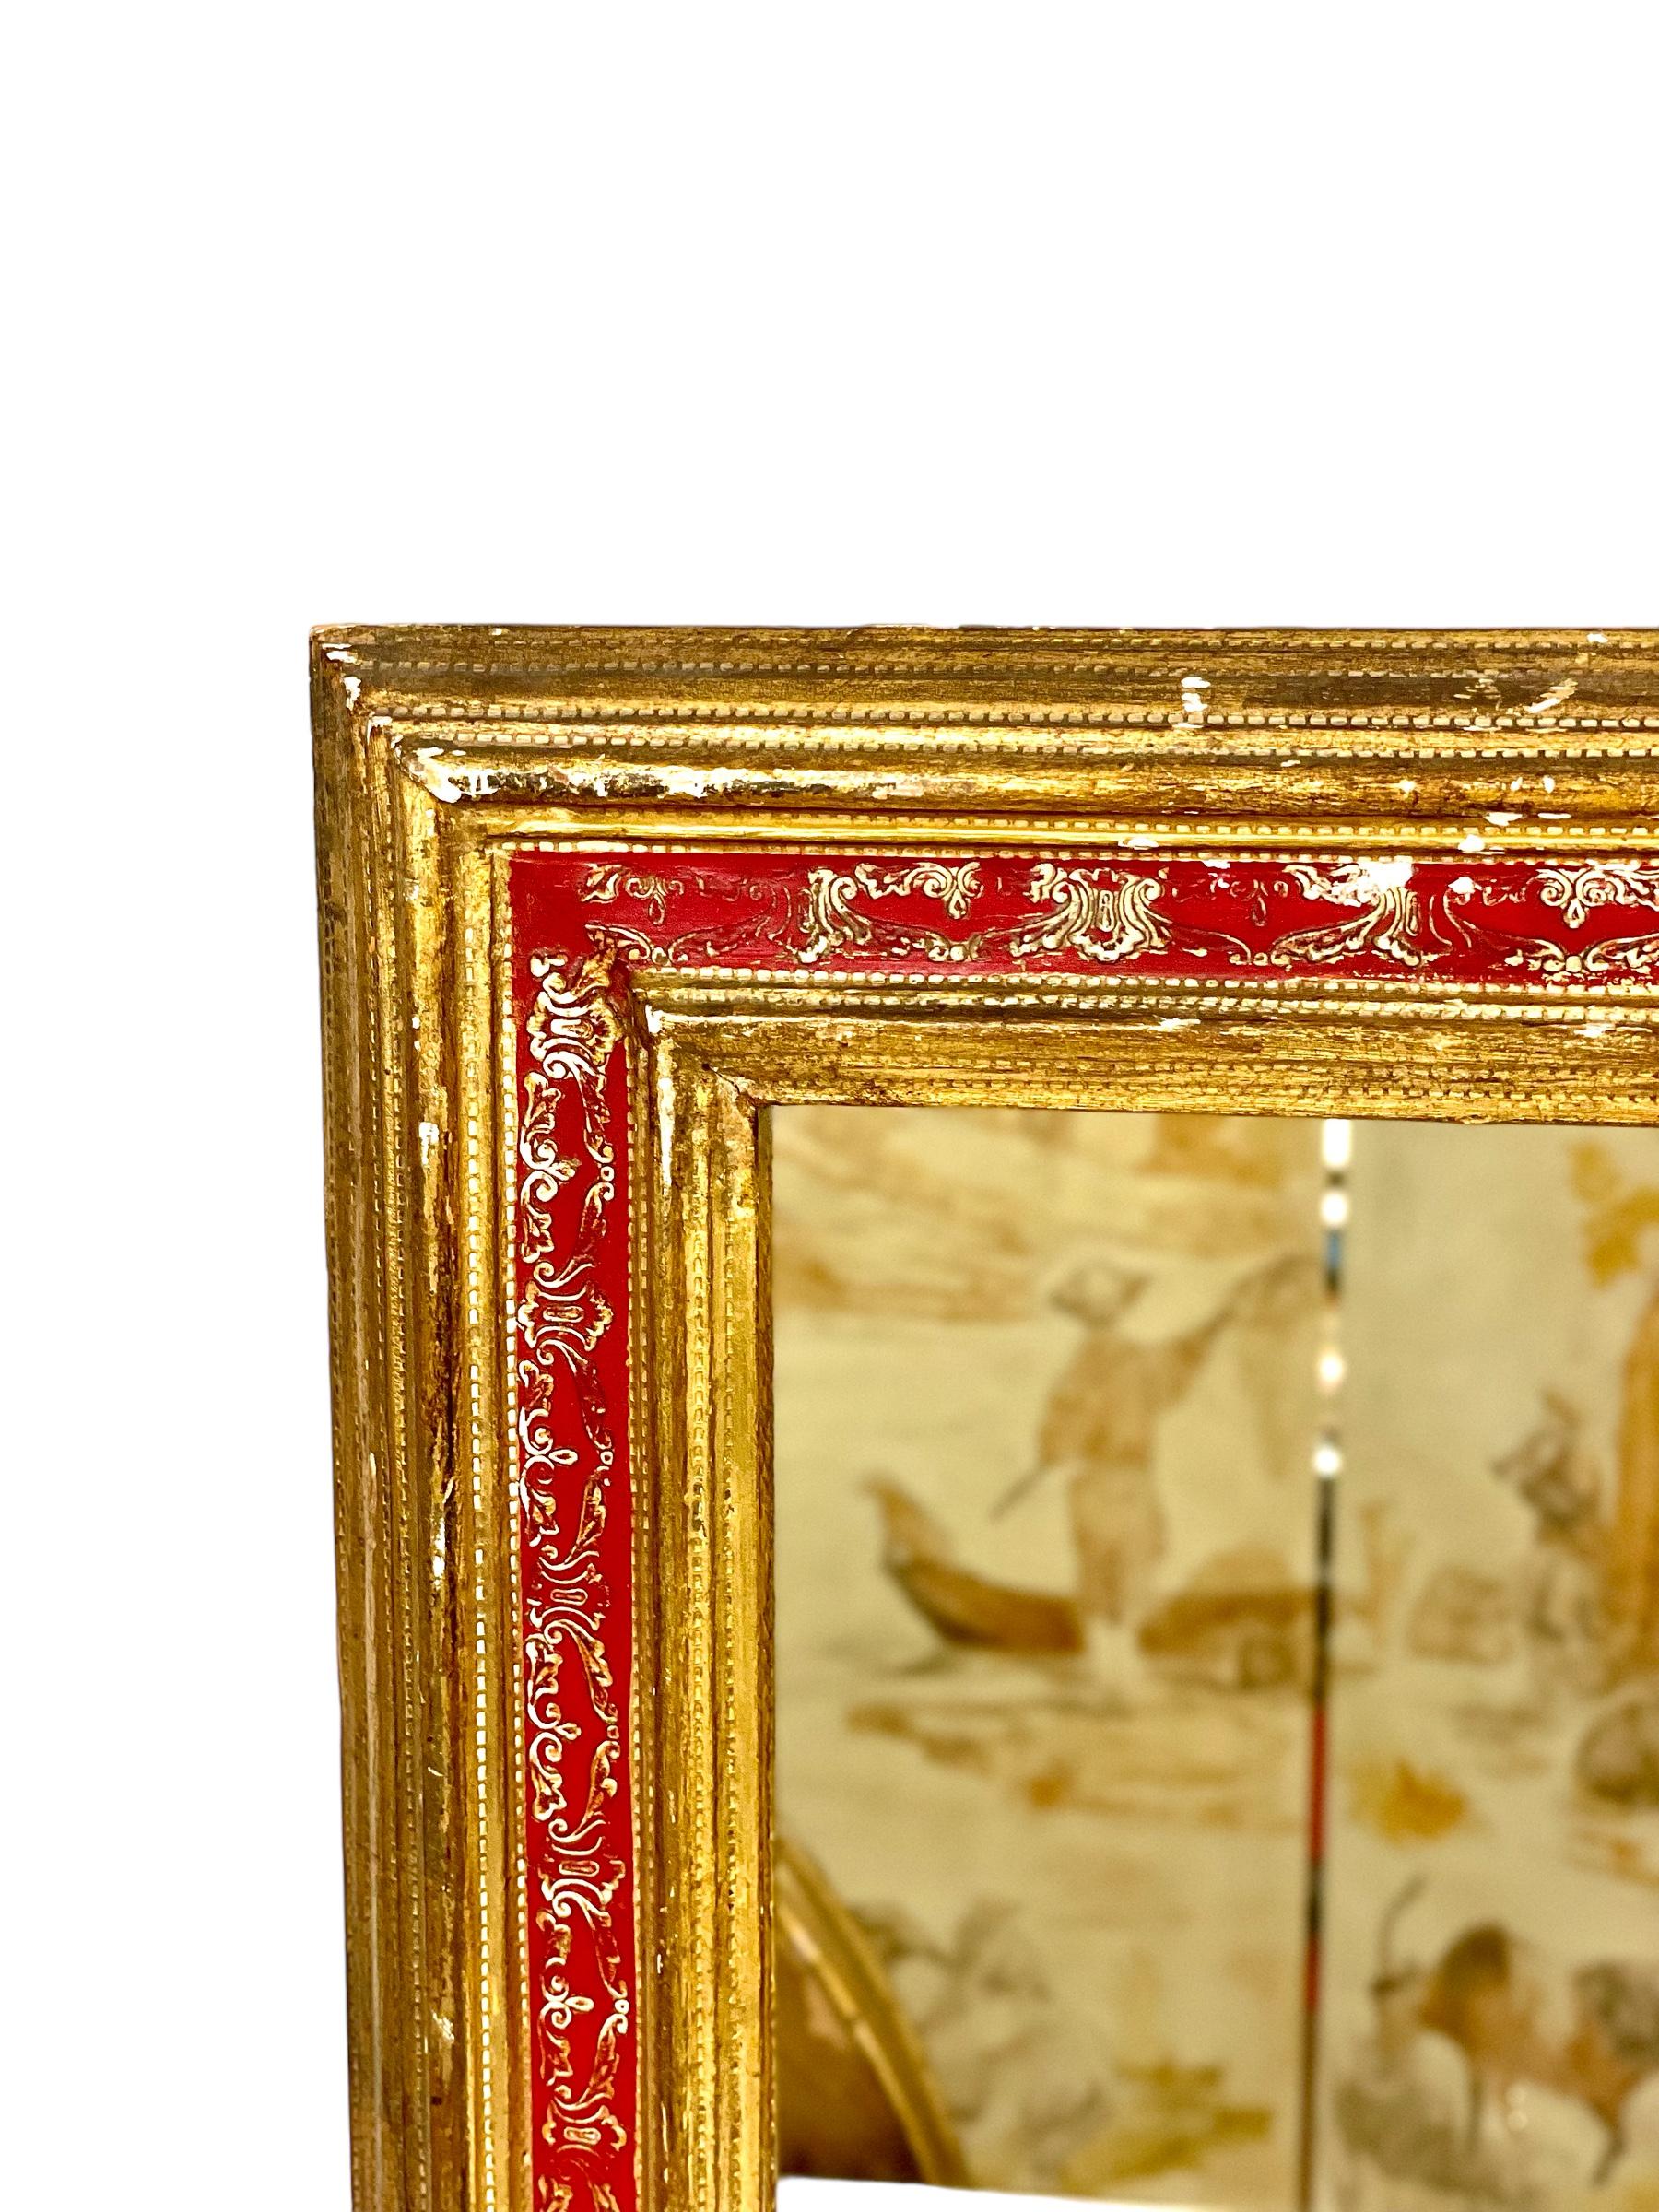 A very decorative wall mirror, in a gilt and red-lacquered wood frame. This small and very ornate mirror dates from the beginning of the 20th century, and its frame features multiple moulded undulations on either side of a striking central band of